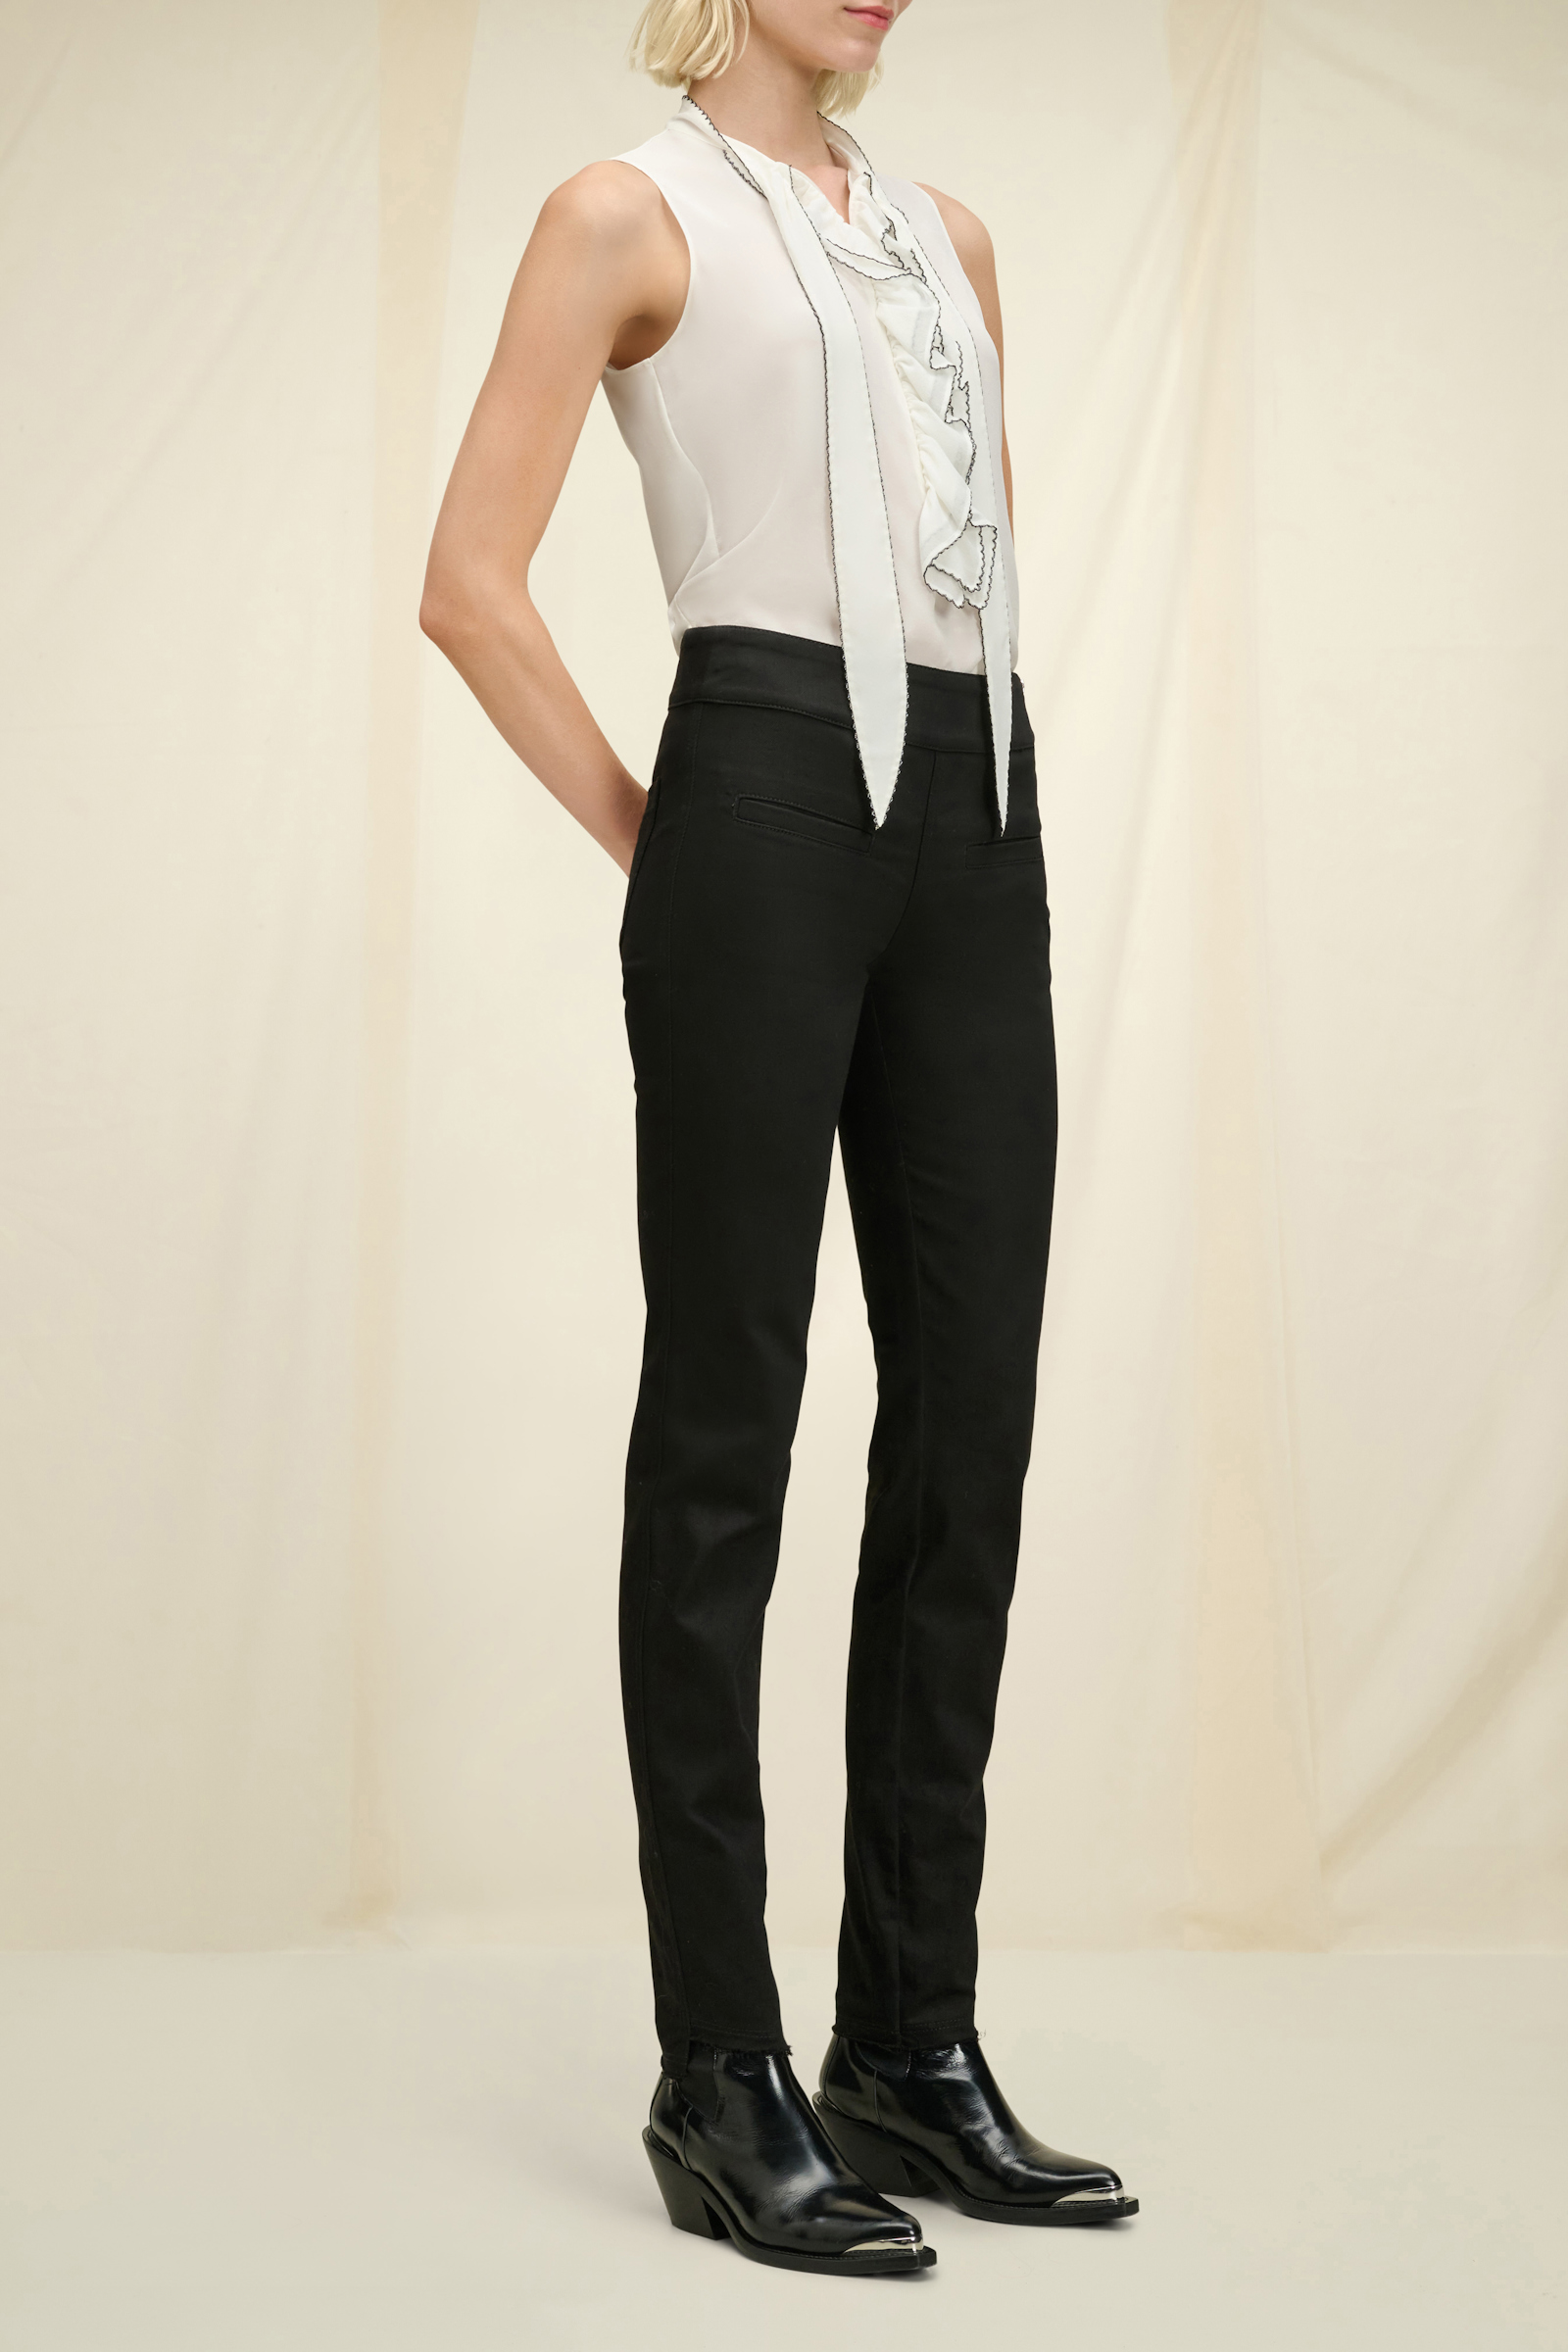 Dorothee Schumacher Jeans with frayed hems pure black